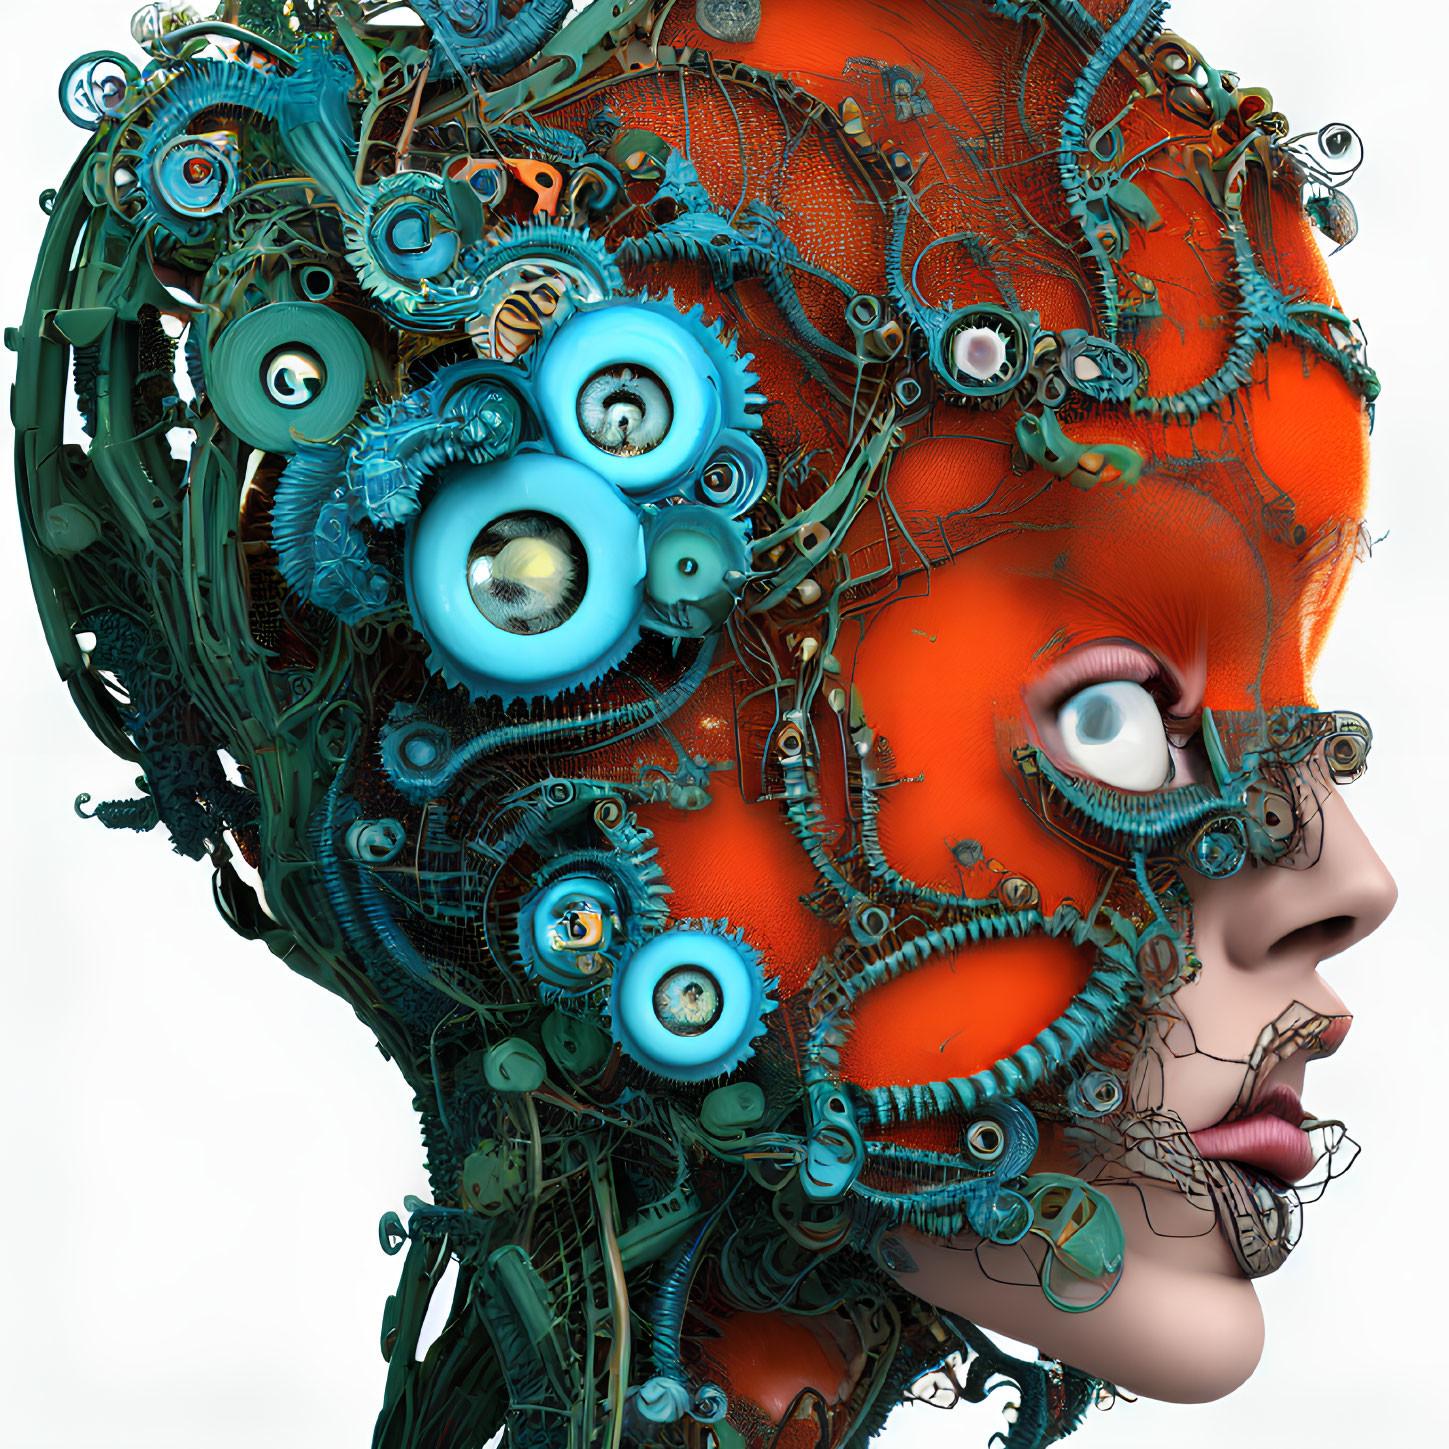 Intricate surreal portrait of woman's head with mechanical gears and organic shapes in vibrant orange and green